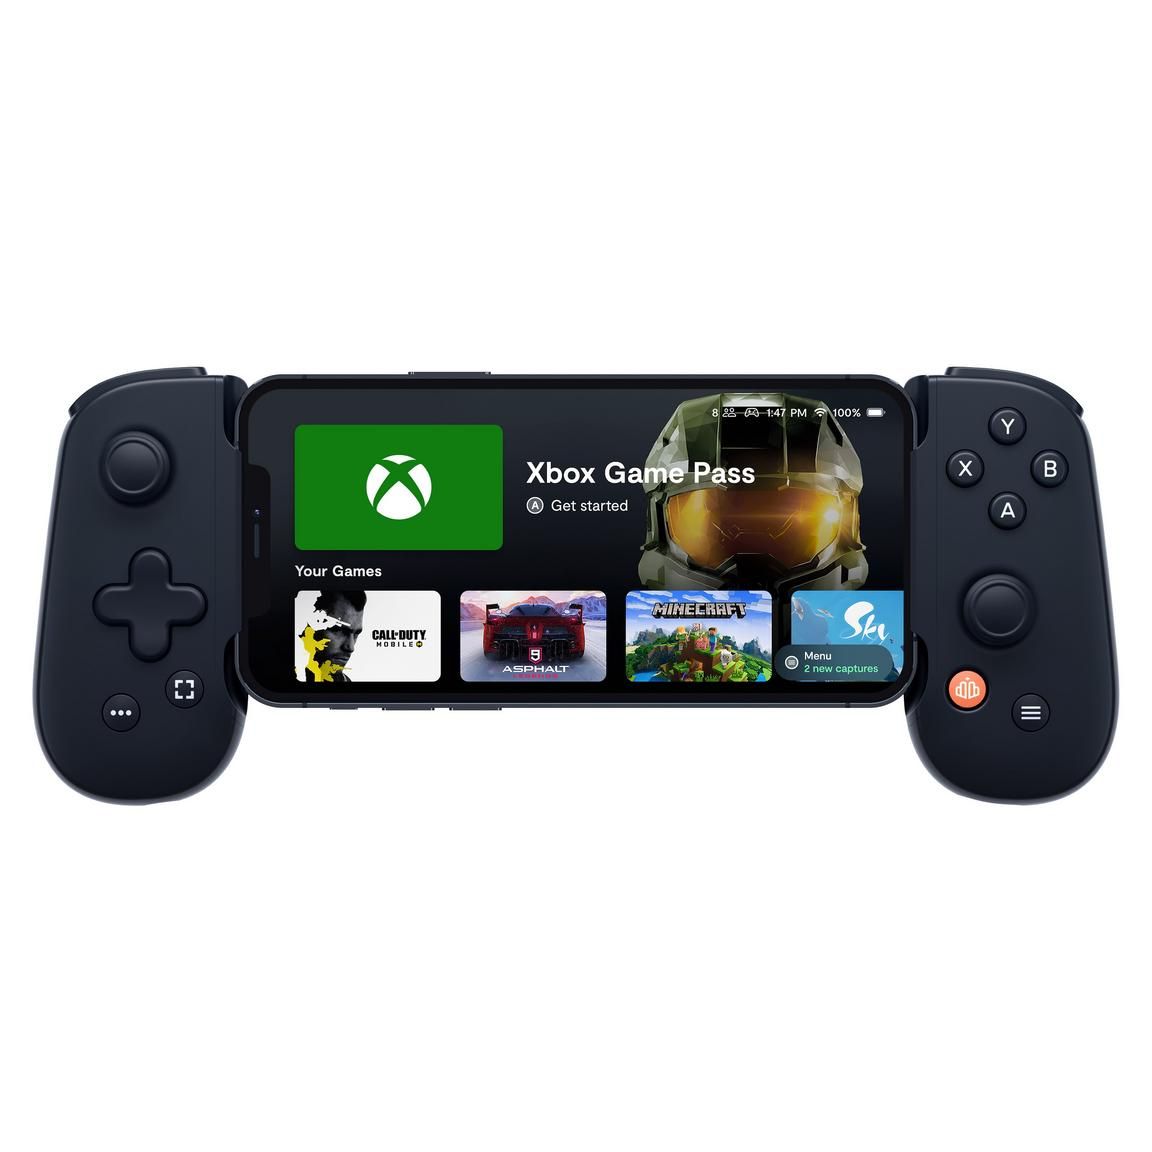 Samsung launches the Smartphone GamePad, an Android controller accessory